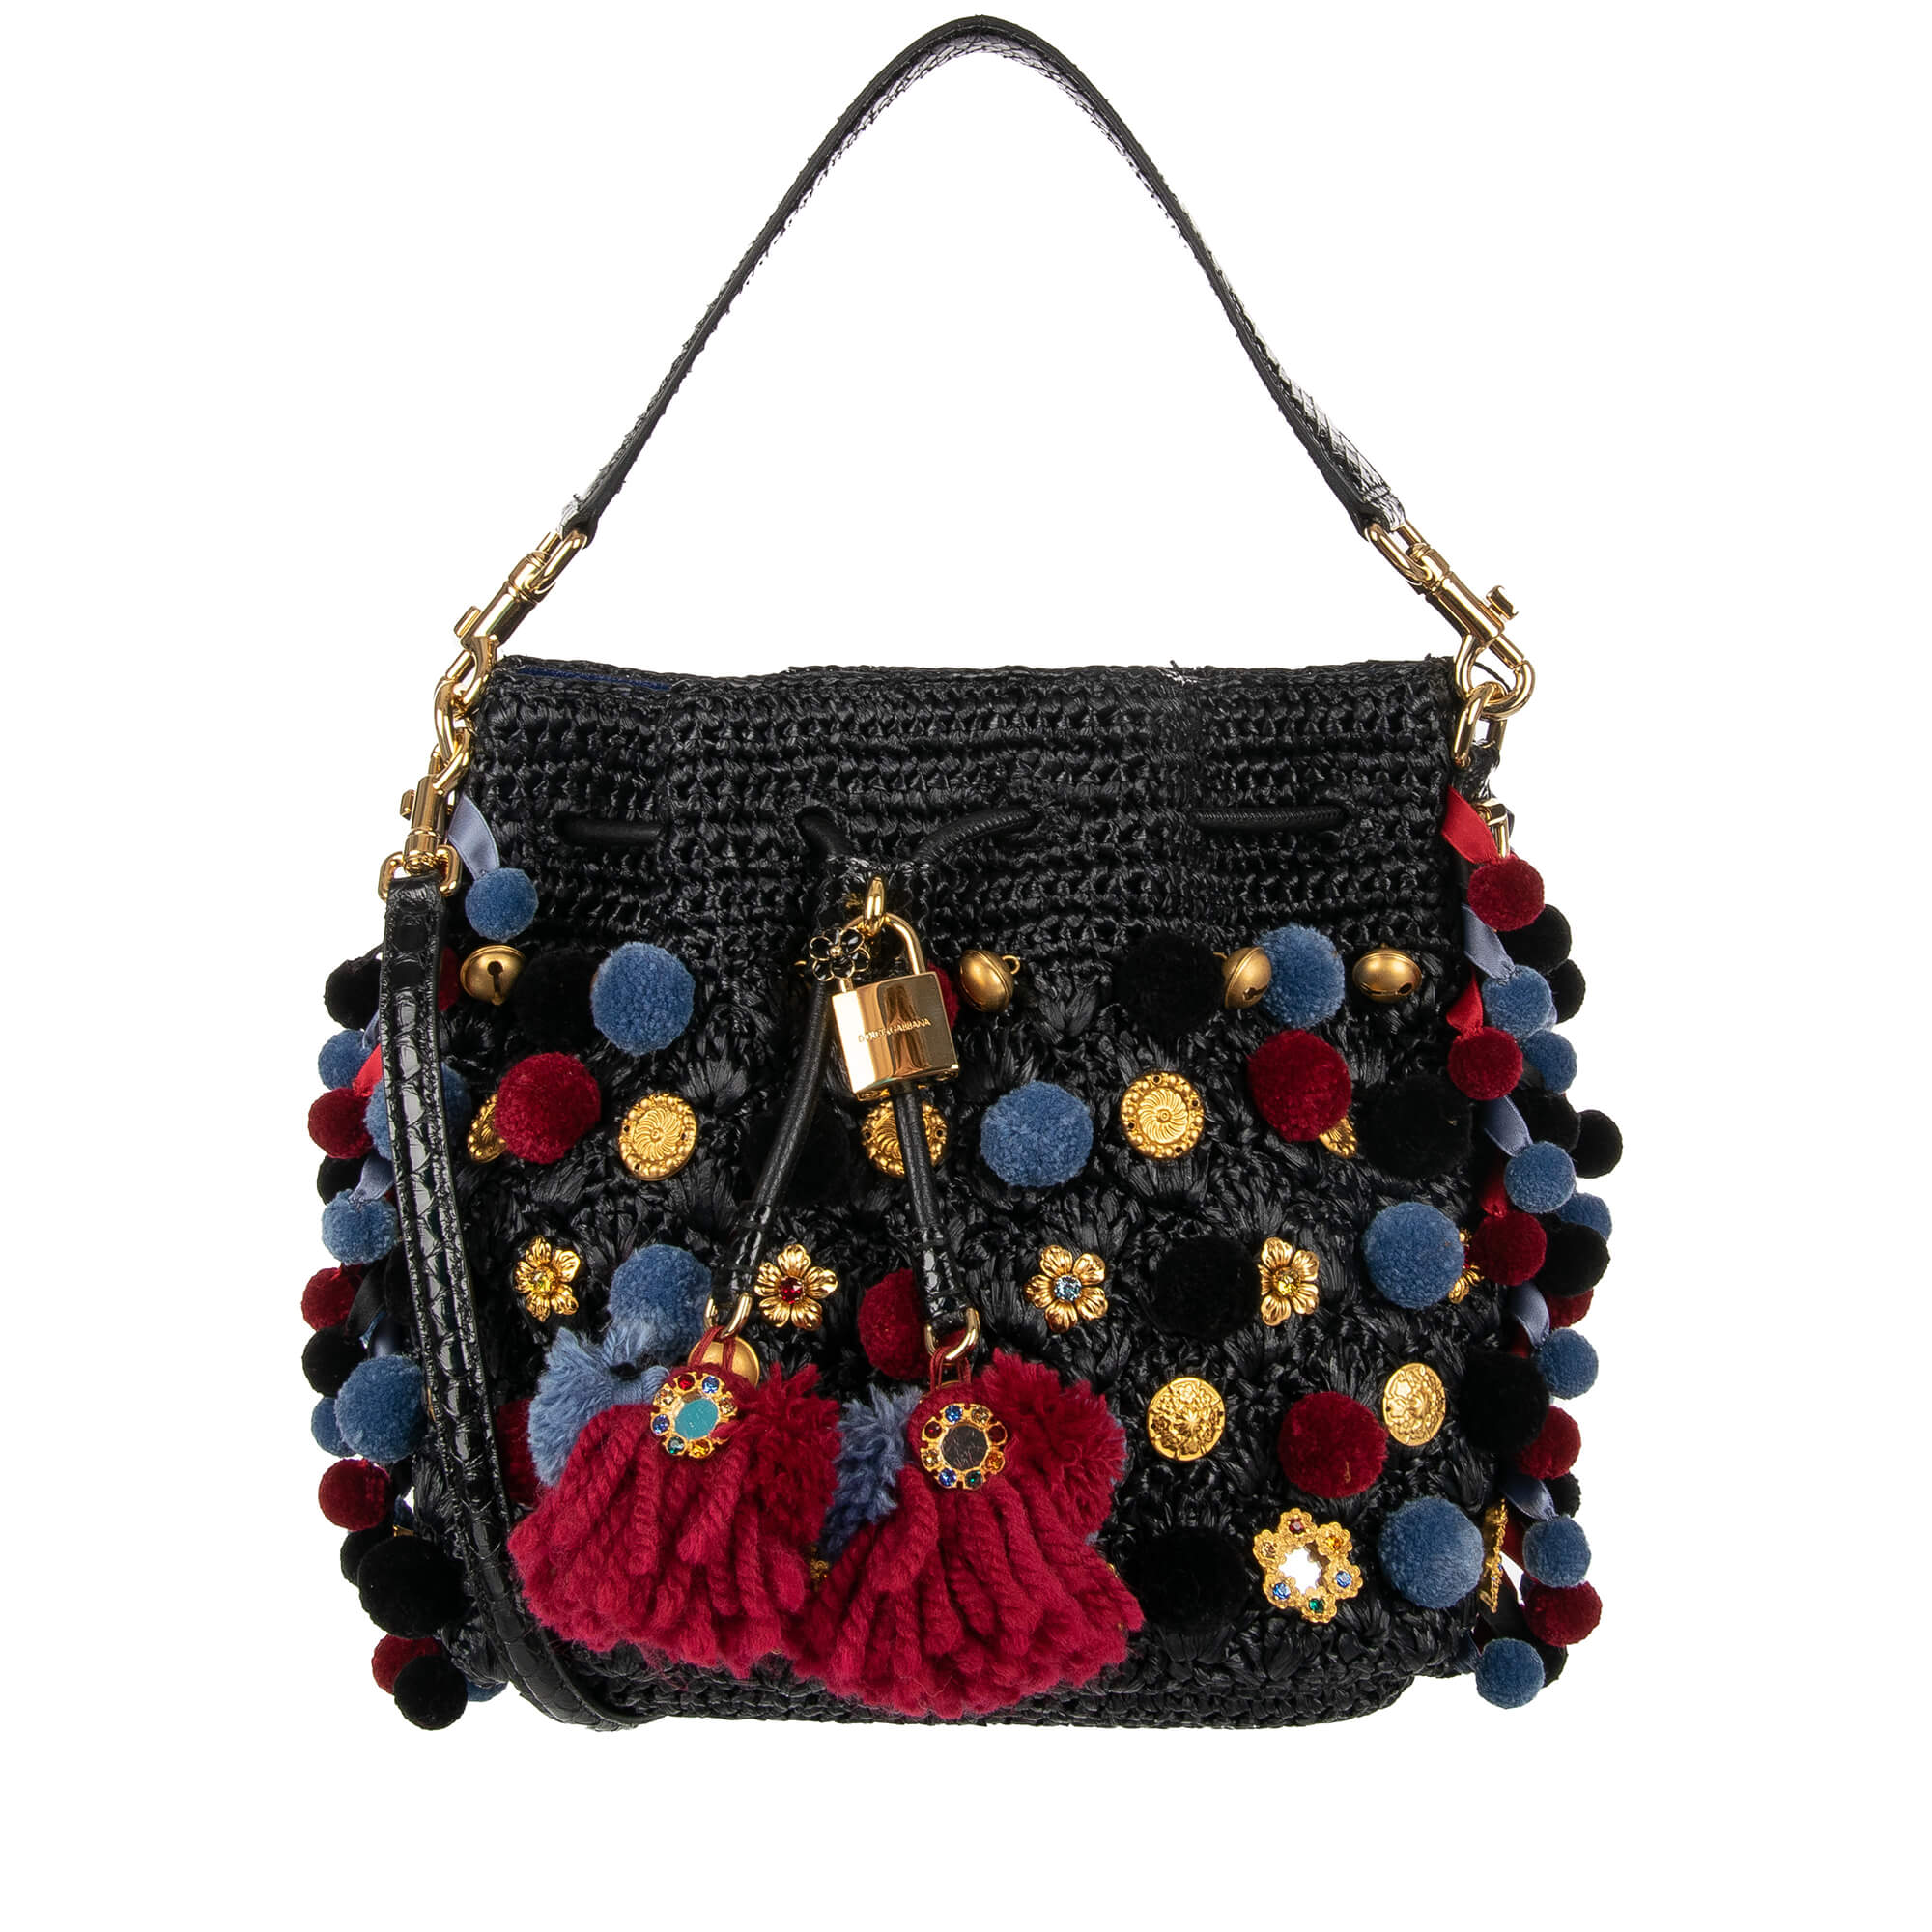 Dolce & Gabbana Raffia Bucket Bag CLAUDIA with Pompoms and Crystals ...